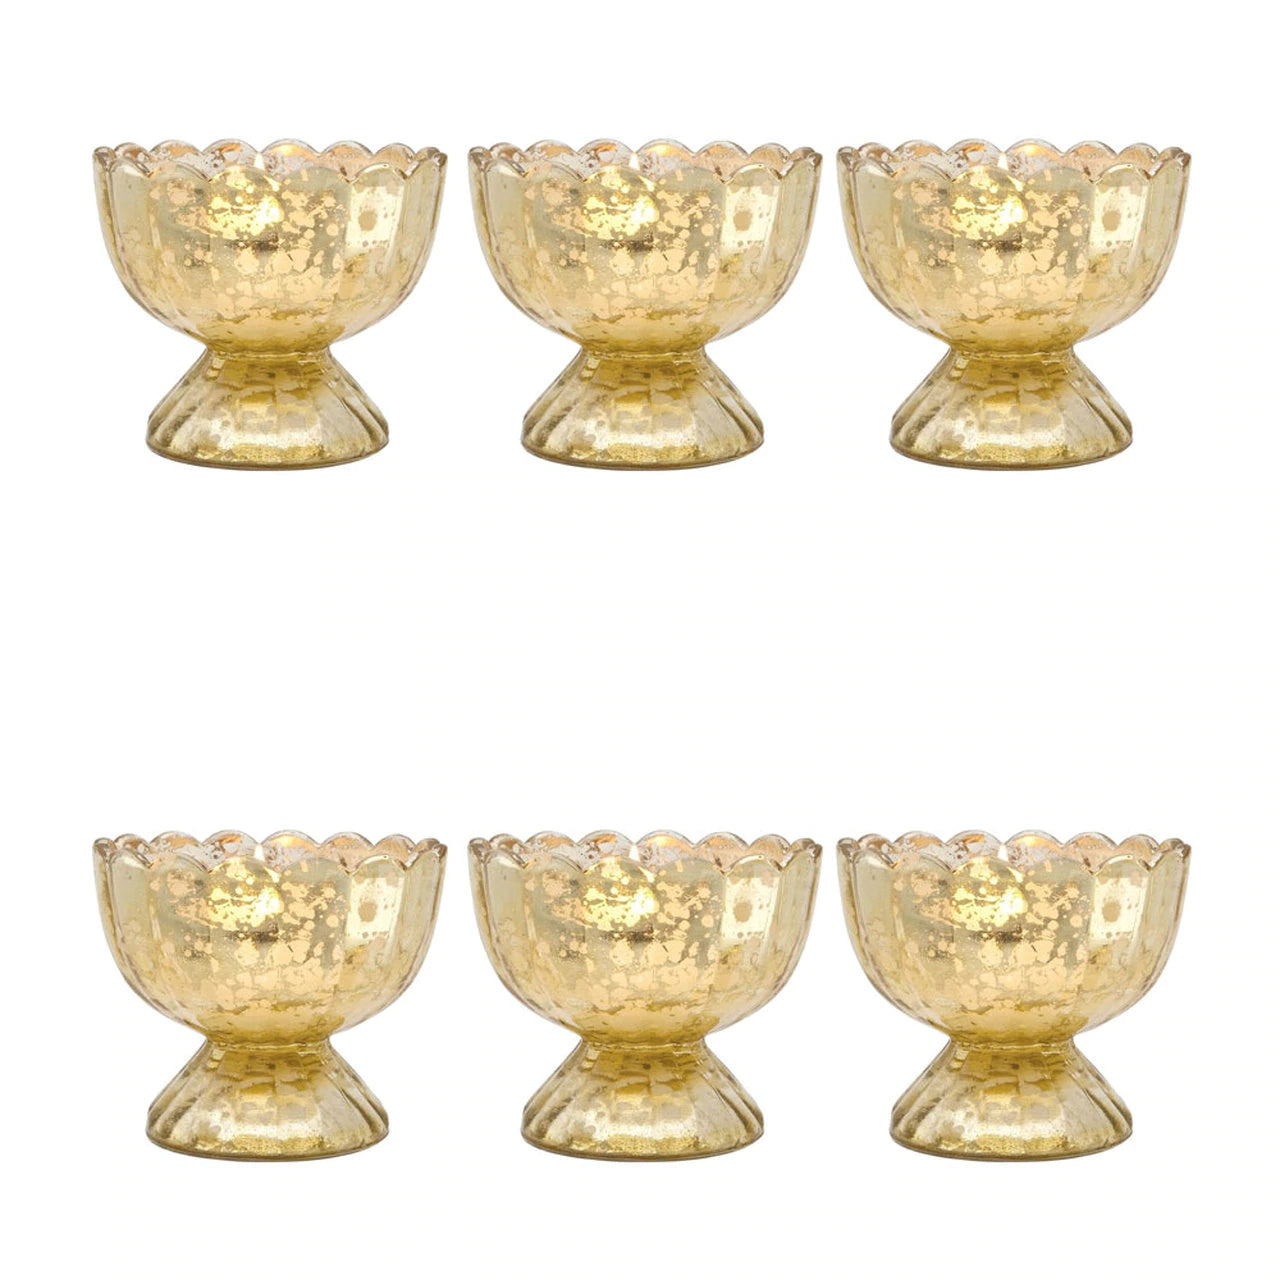 6 Pack | Vintage Mercury Glass Chalice Candle Holders (3-Inch, Suzanne Design, Sundae Cup Motif, Gold) - For Use with Tea Lights - PaperLanternStore.com - Paper Lanterns, Decor, Party Lights & More